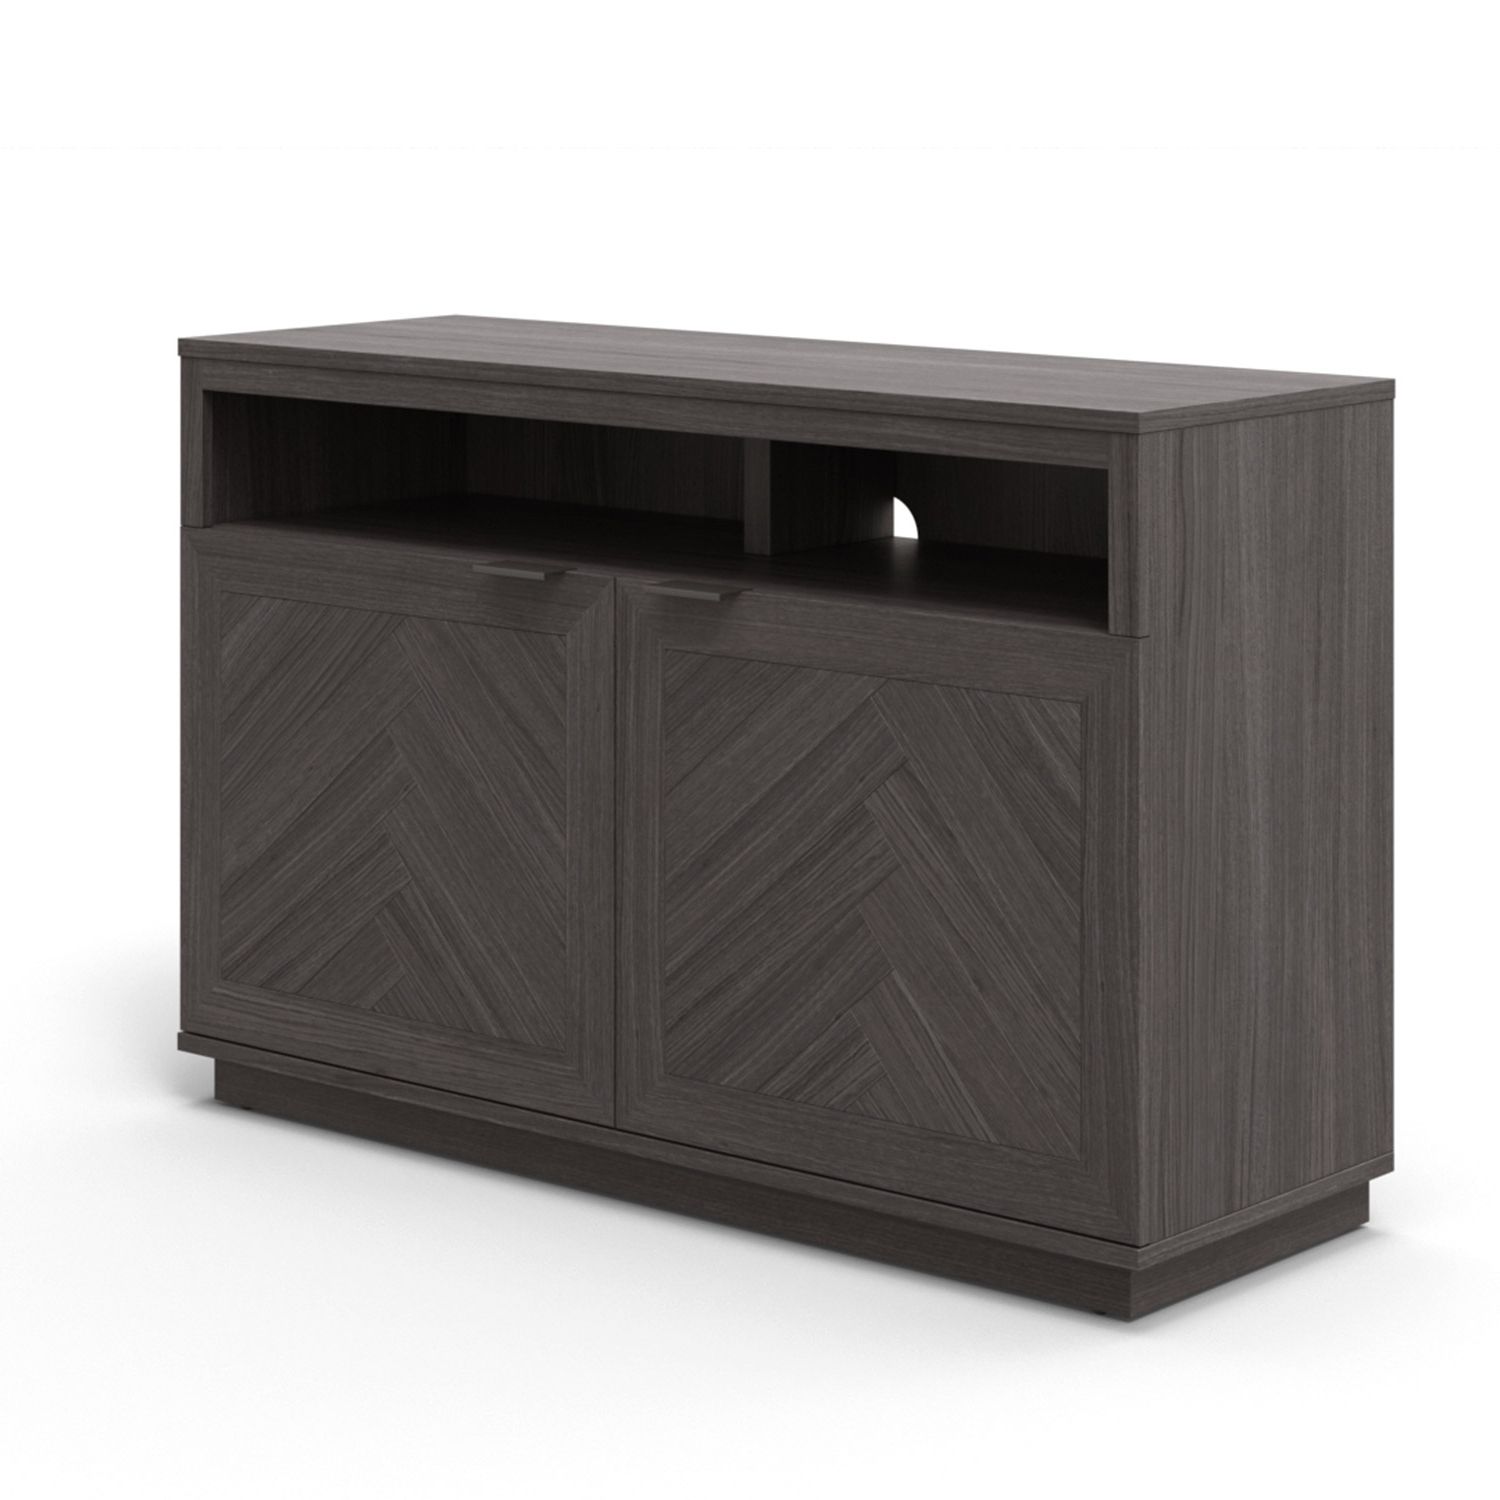 Whalen For Farmhouse Tv Stands For 75" Flat Screen With Console Table Storage Cabinet (View 3 of 20)